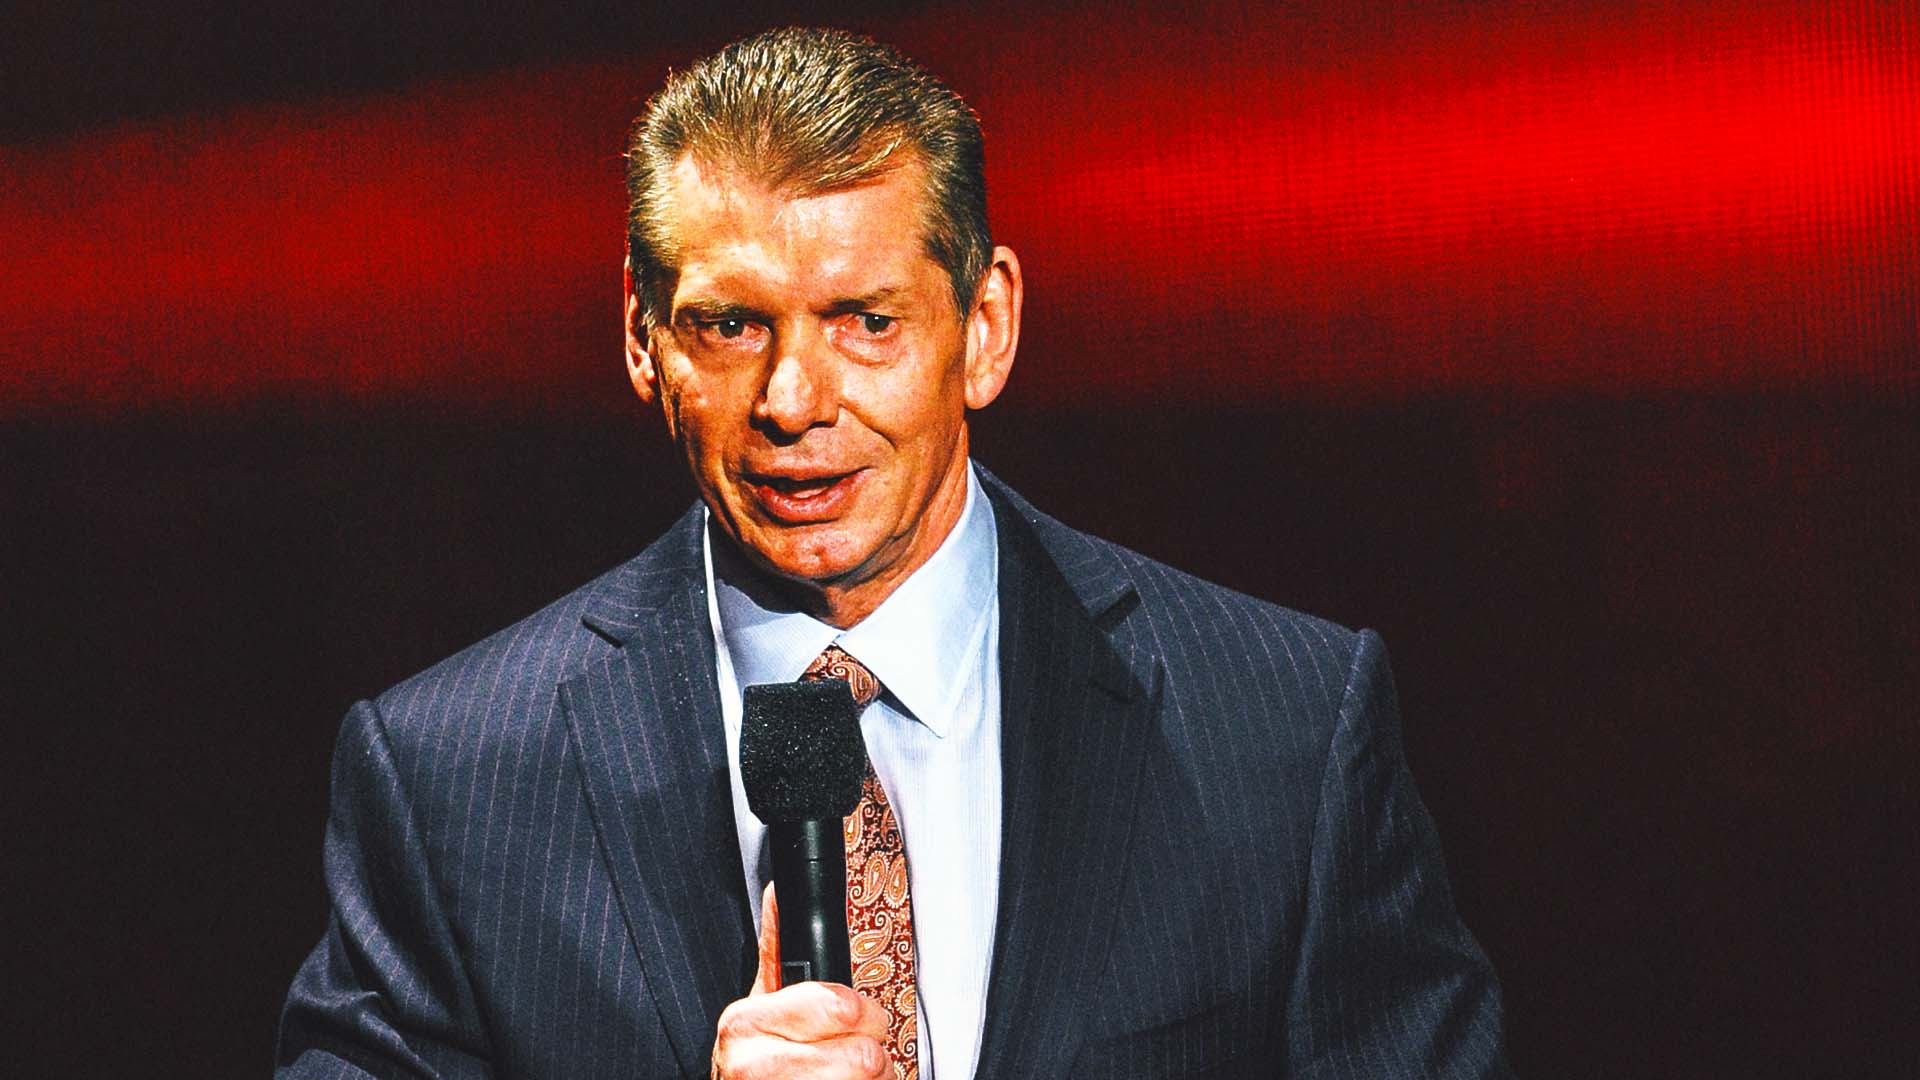 Vince McMahon resigns following allegations of sexual misconduct